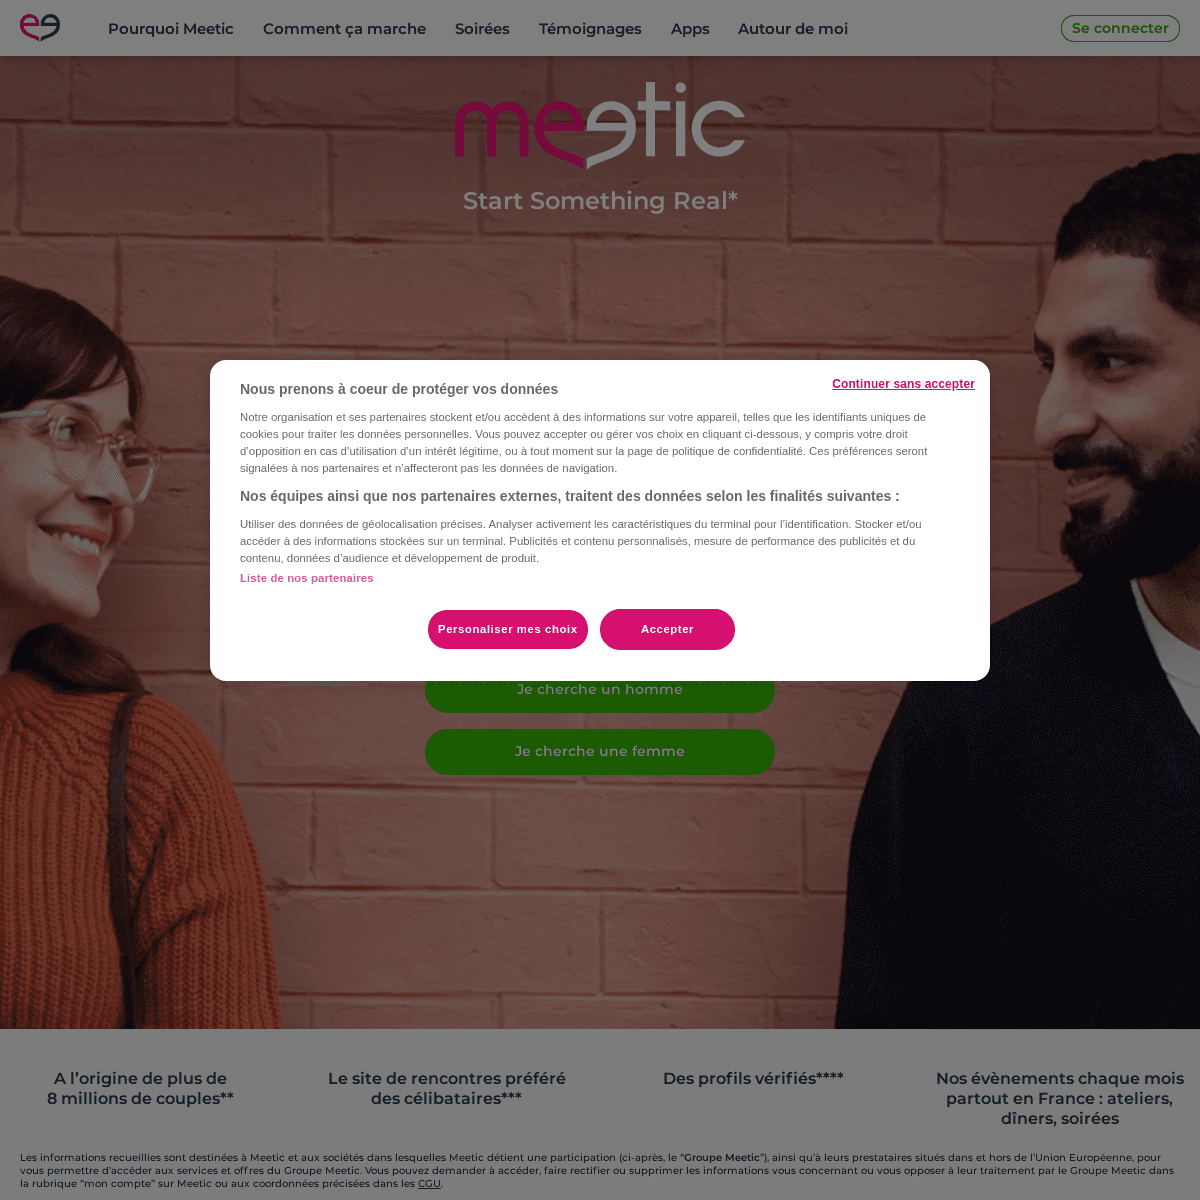 A complete backup of https://meetic.fr